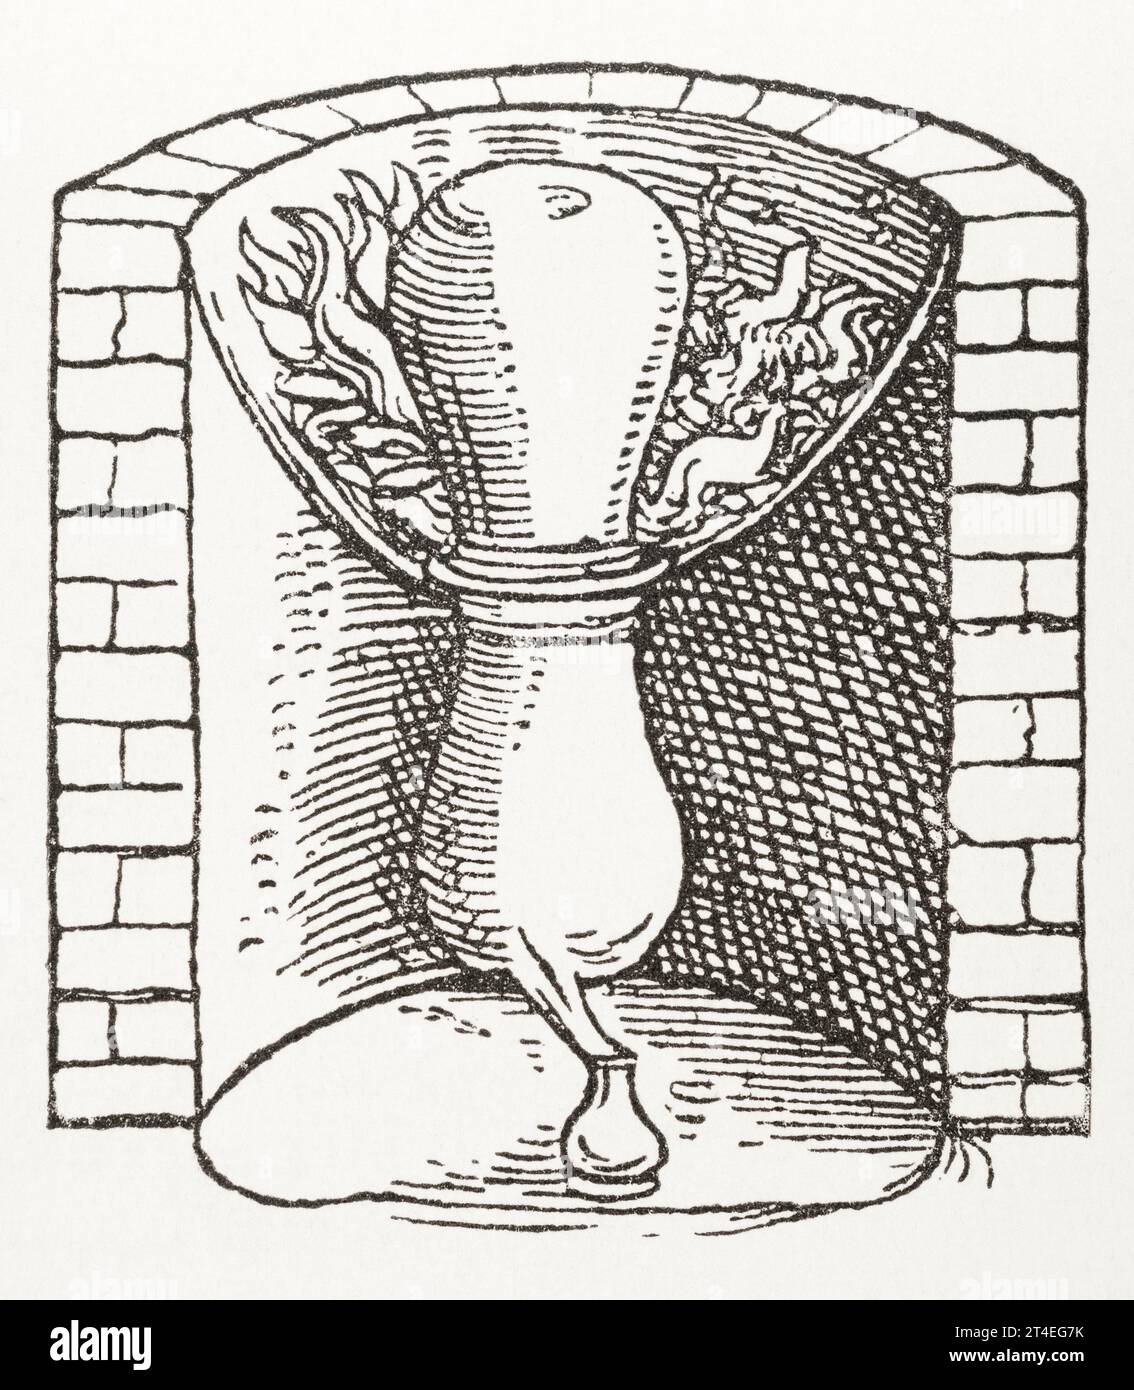 16th c. dry distillation apparatus from Gaulther Ryff's 'Distiller's Book', 1567. Used to make Juniper Oil. See Notes. Stock Photo